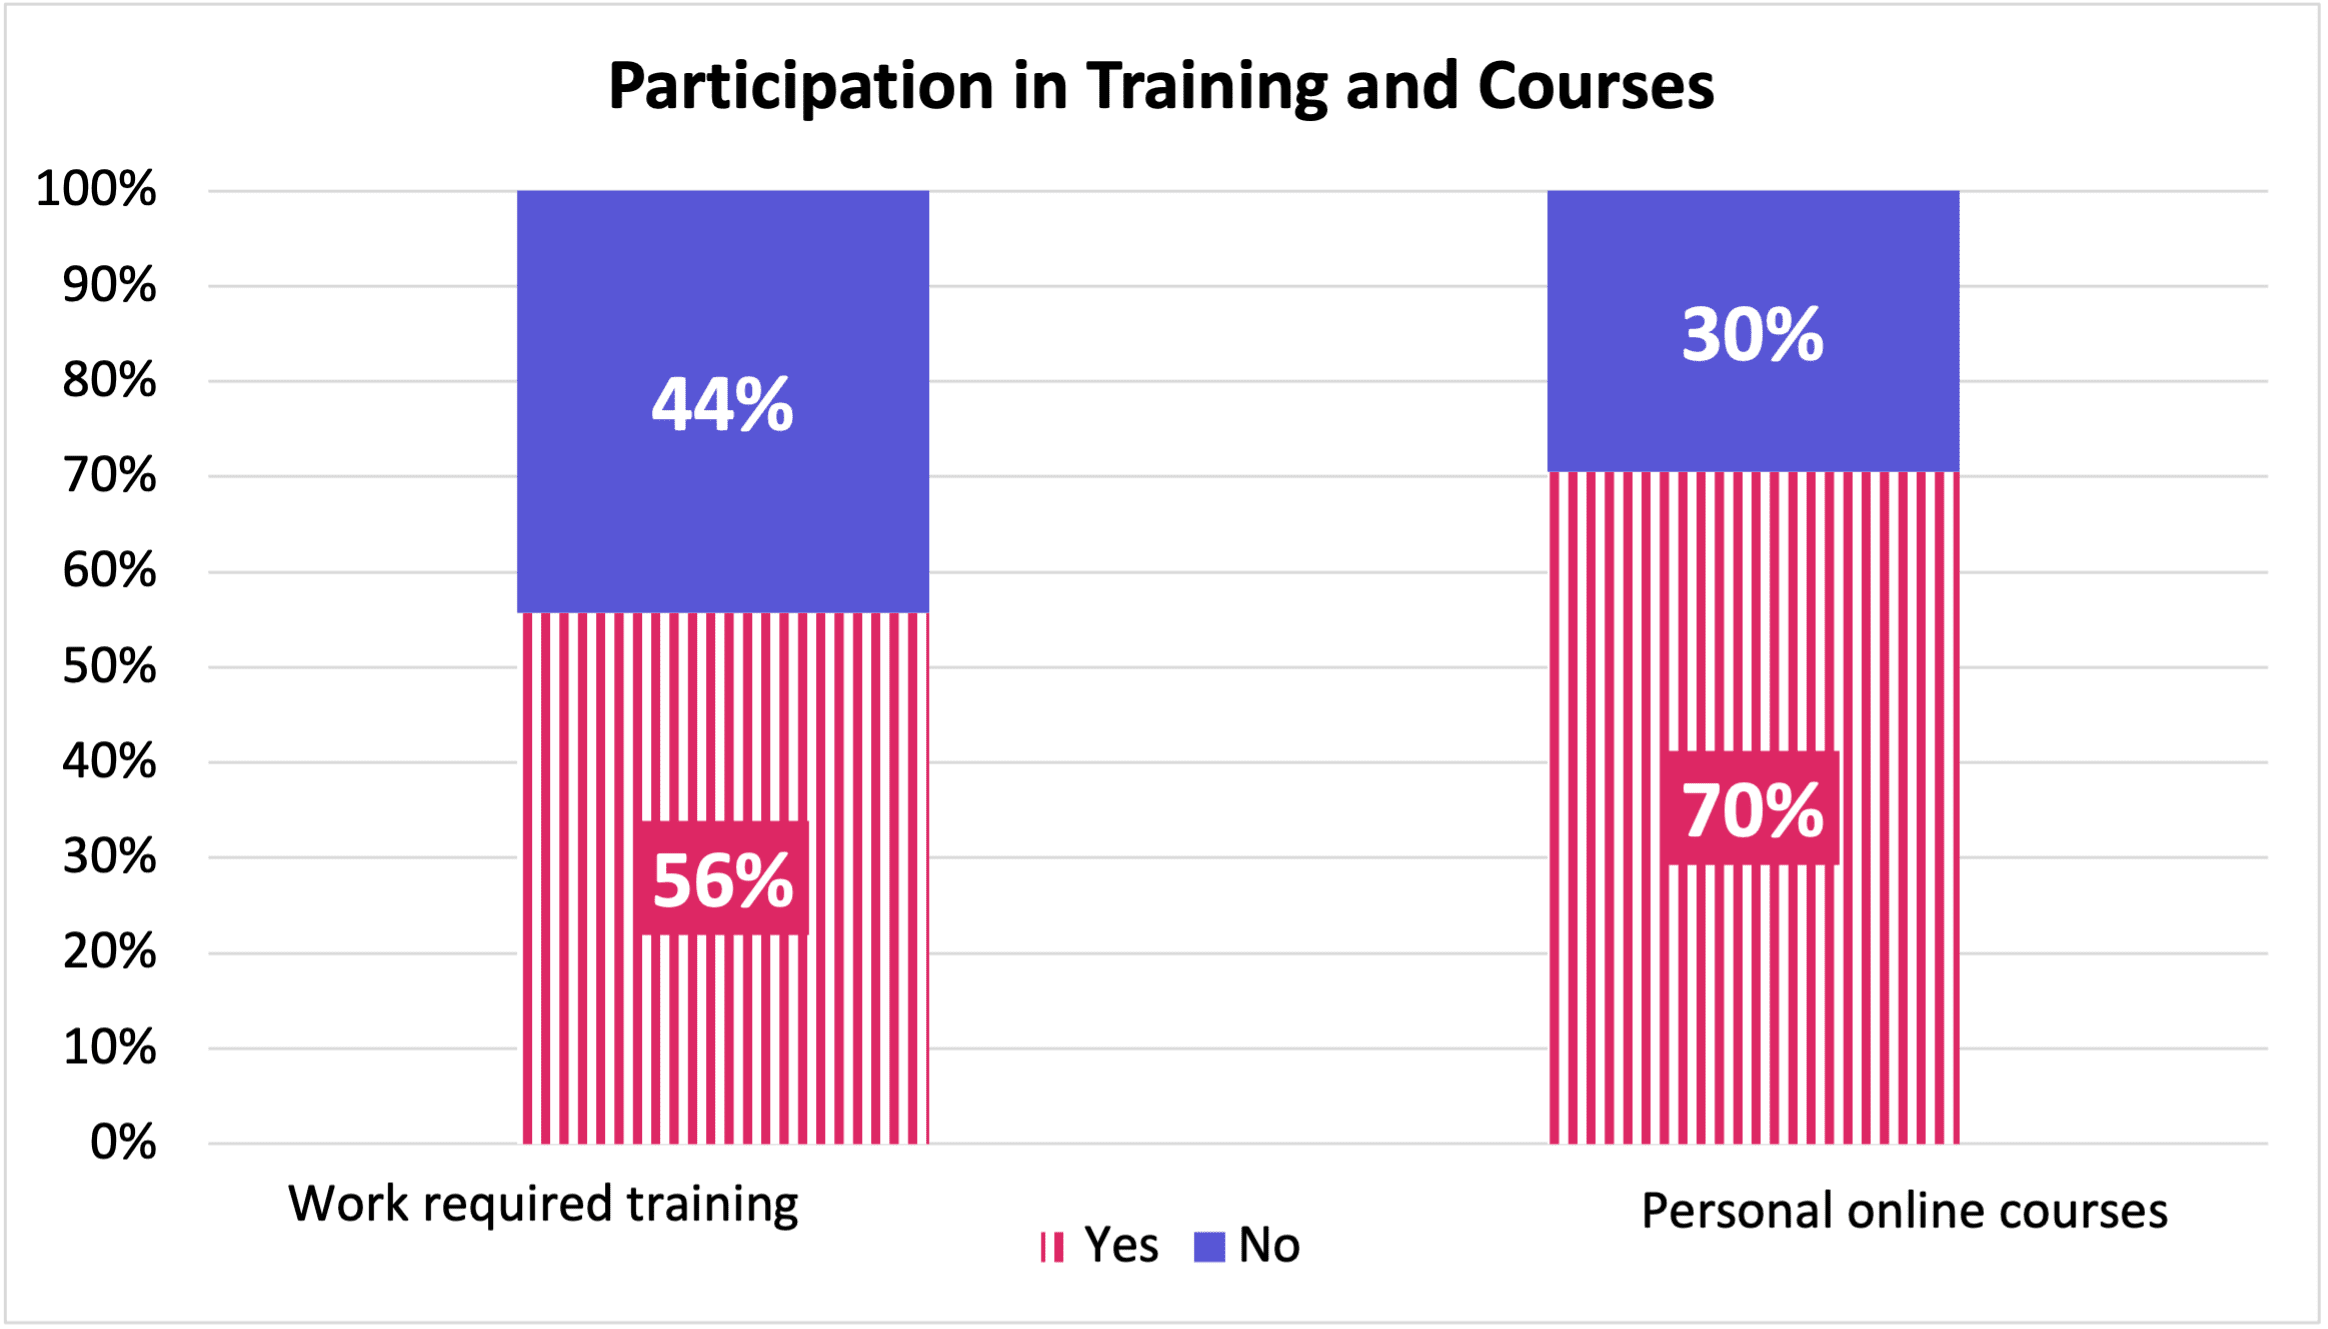 Chart: Participation in Training and Courses. Two columns, first is "Working required training, 'yes or no'. 56% of respondents said "Yes". Second column is "Personal online courses, yes or no", with 70% of respondents selecting 'Yes'.